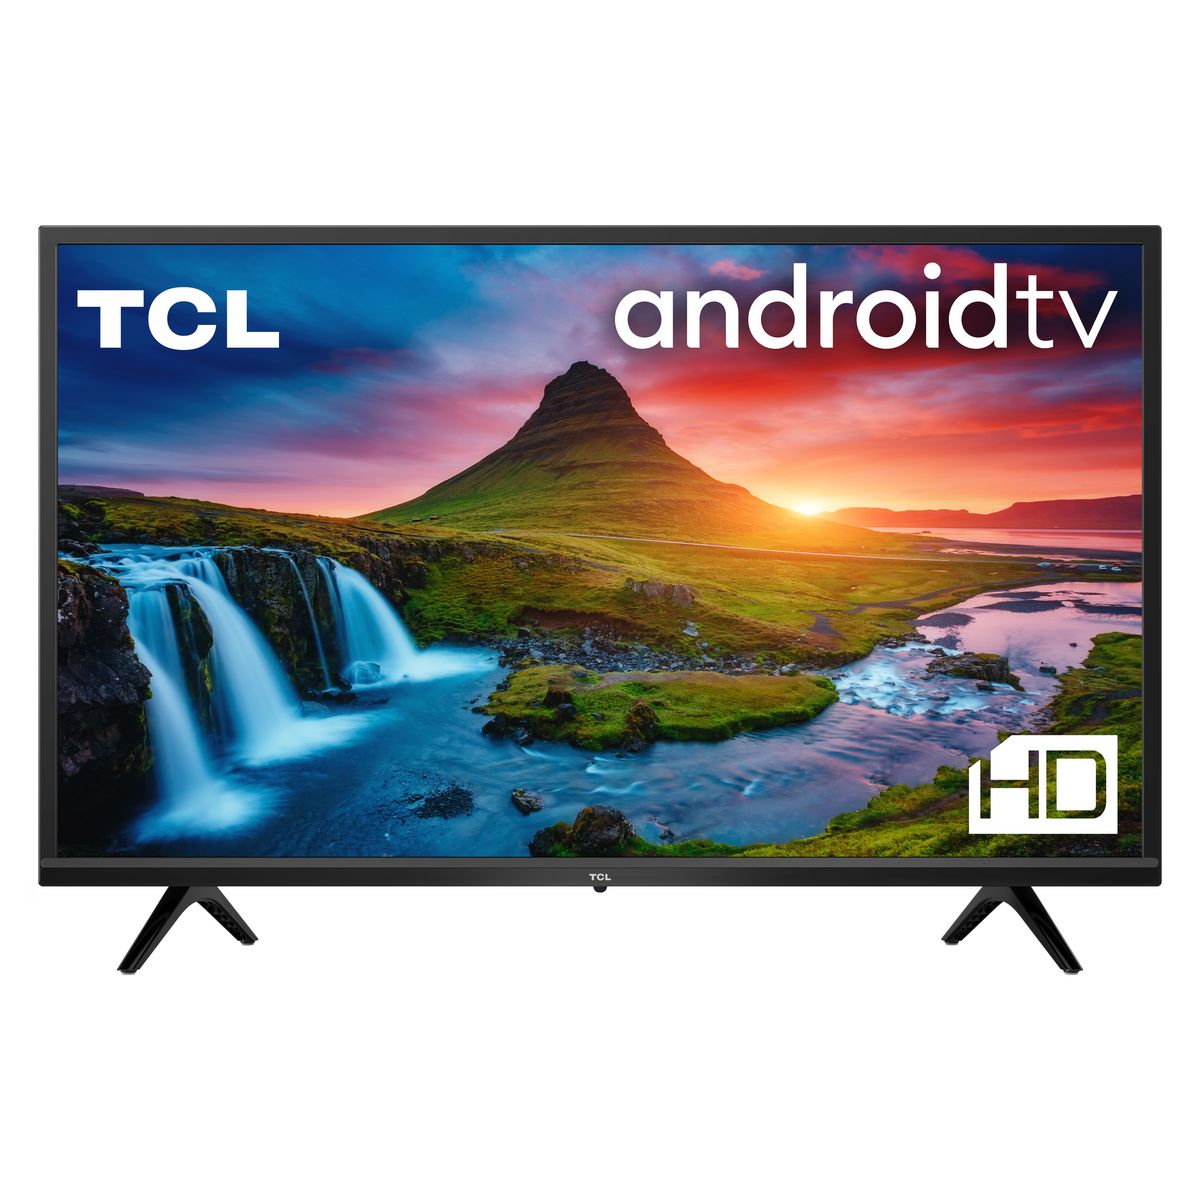 TCL 32S5403 TV LED HD HDR 80 cm Android TV pas cher 